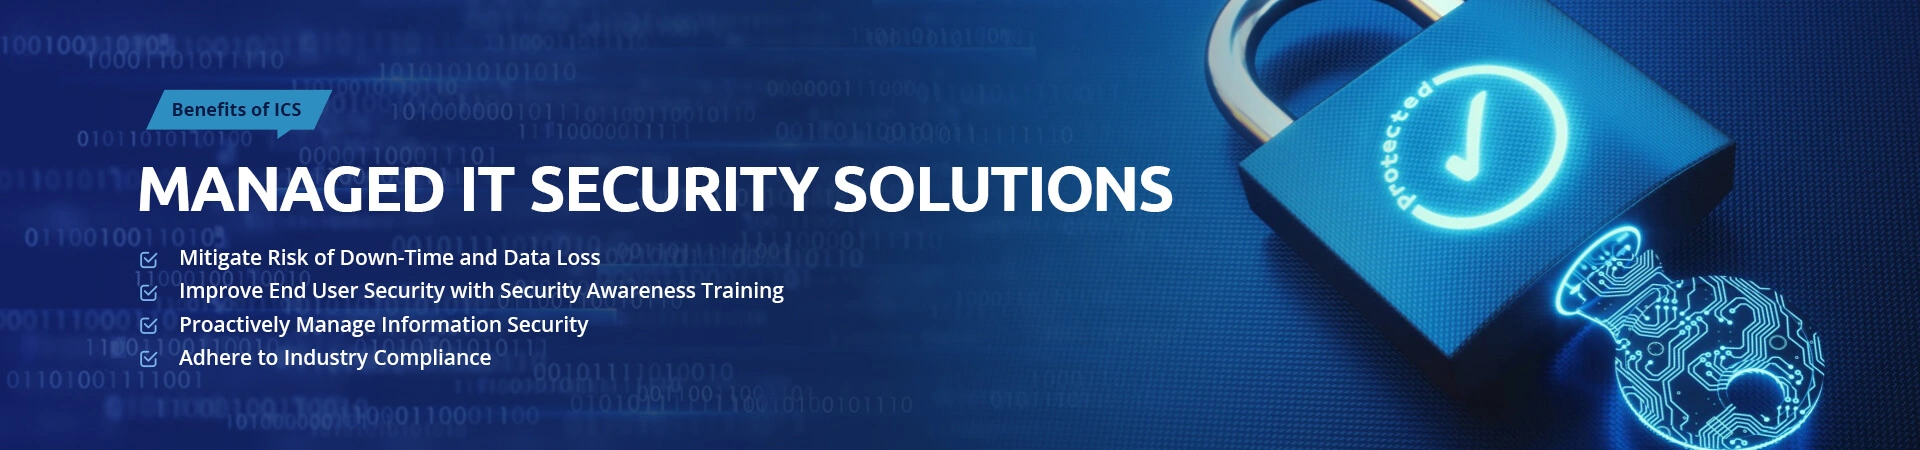 NJ Managed IT Security Solutions